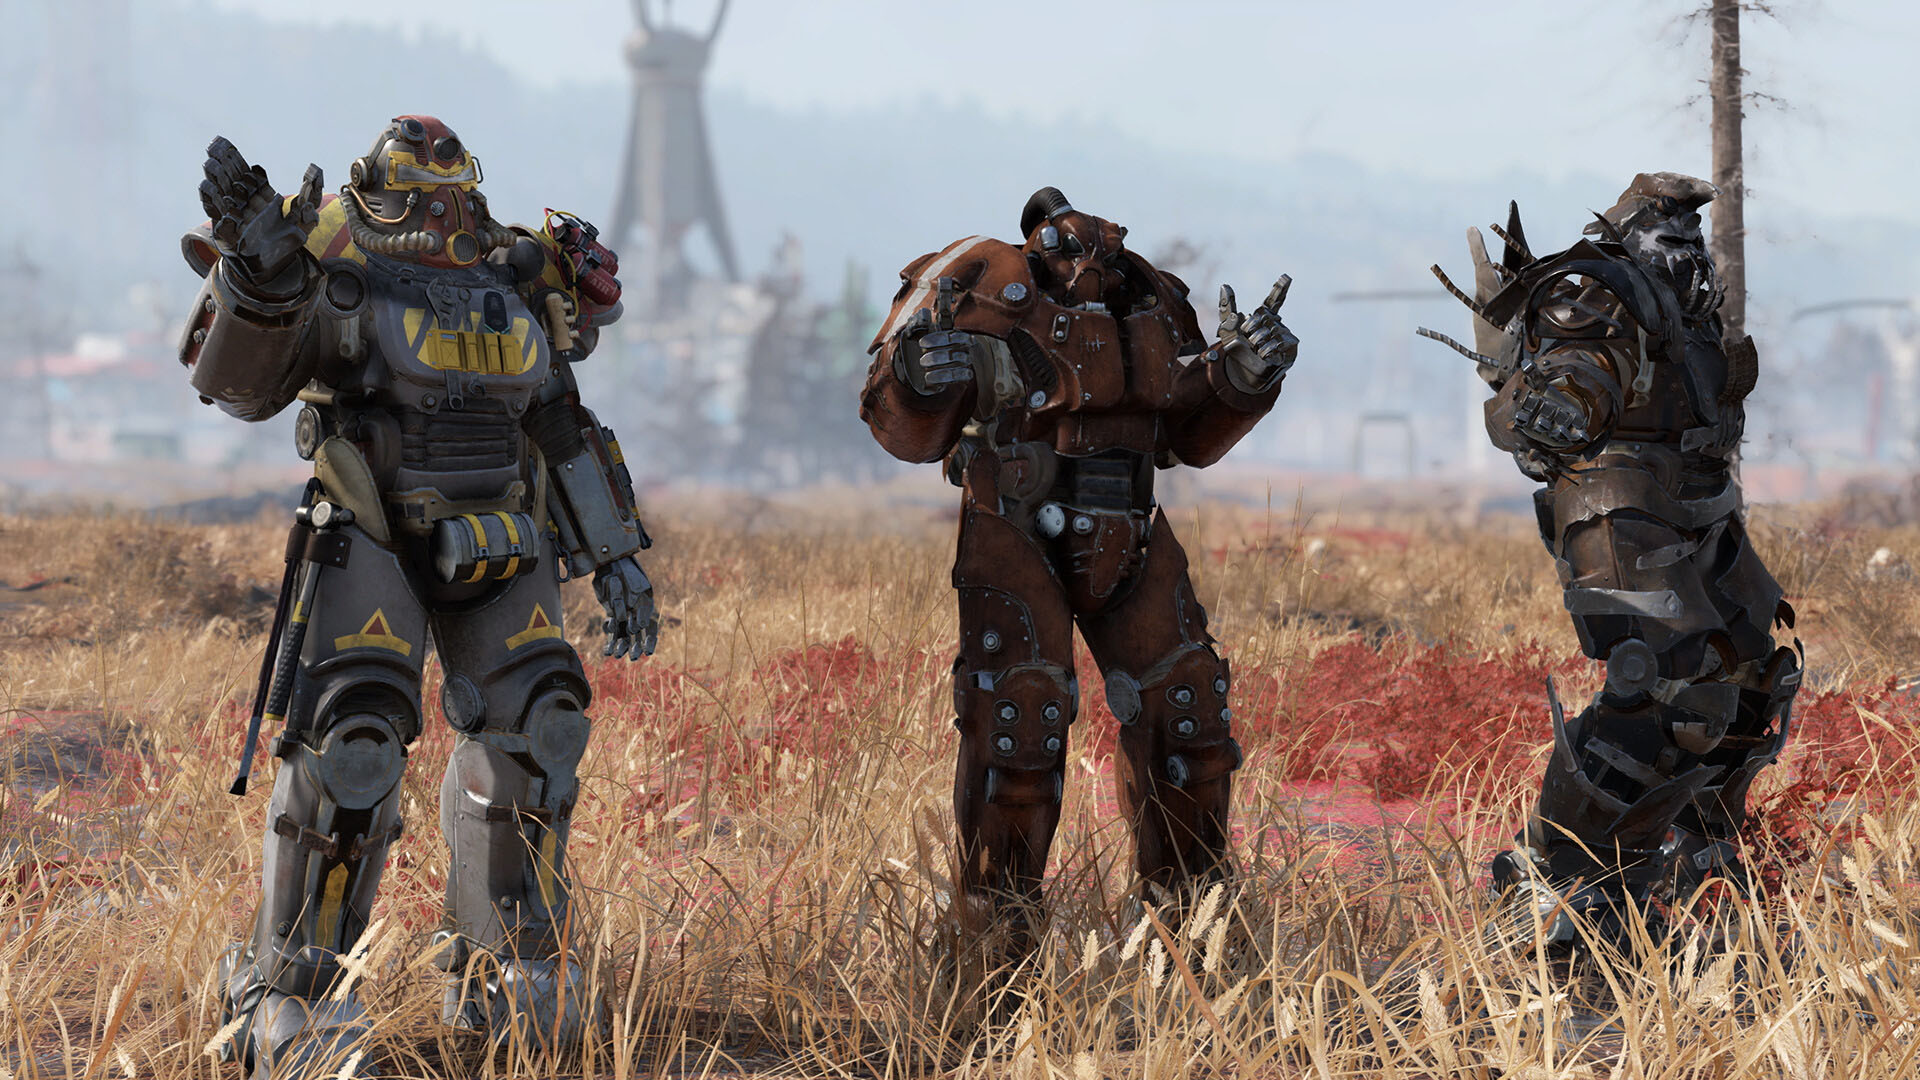 amazon, back to its prime: fallout 76 hits record player numbers, nearly six years after it launched